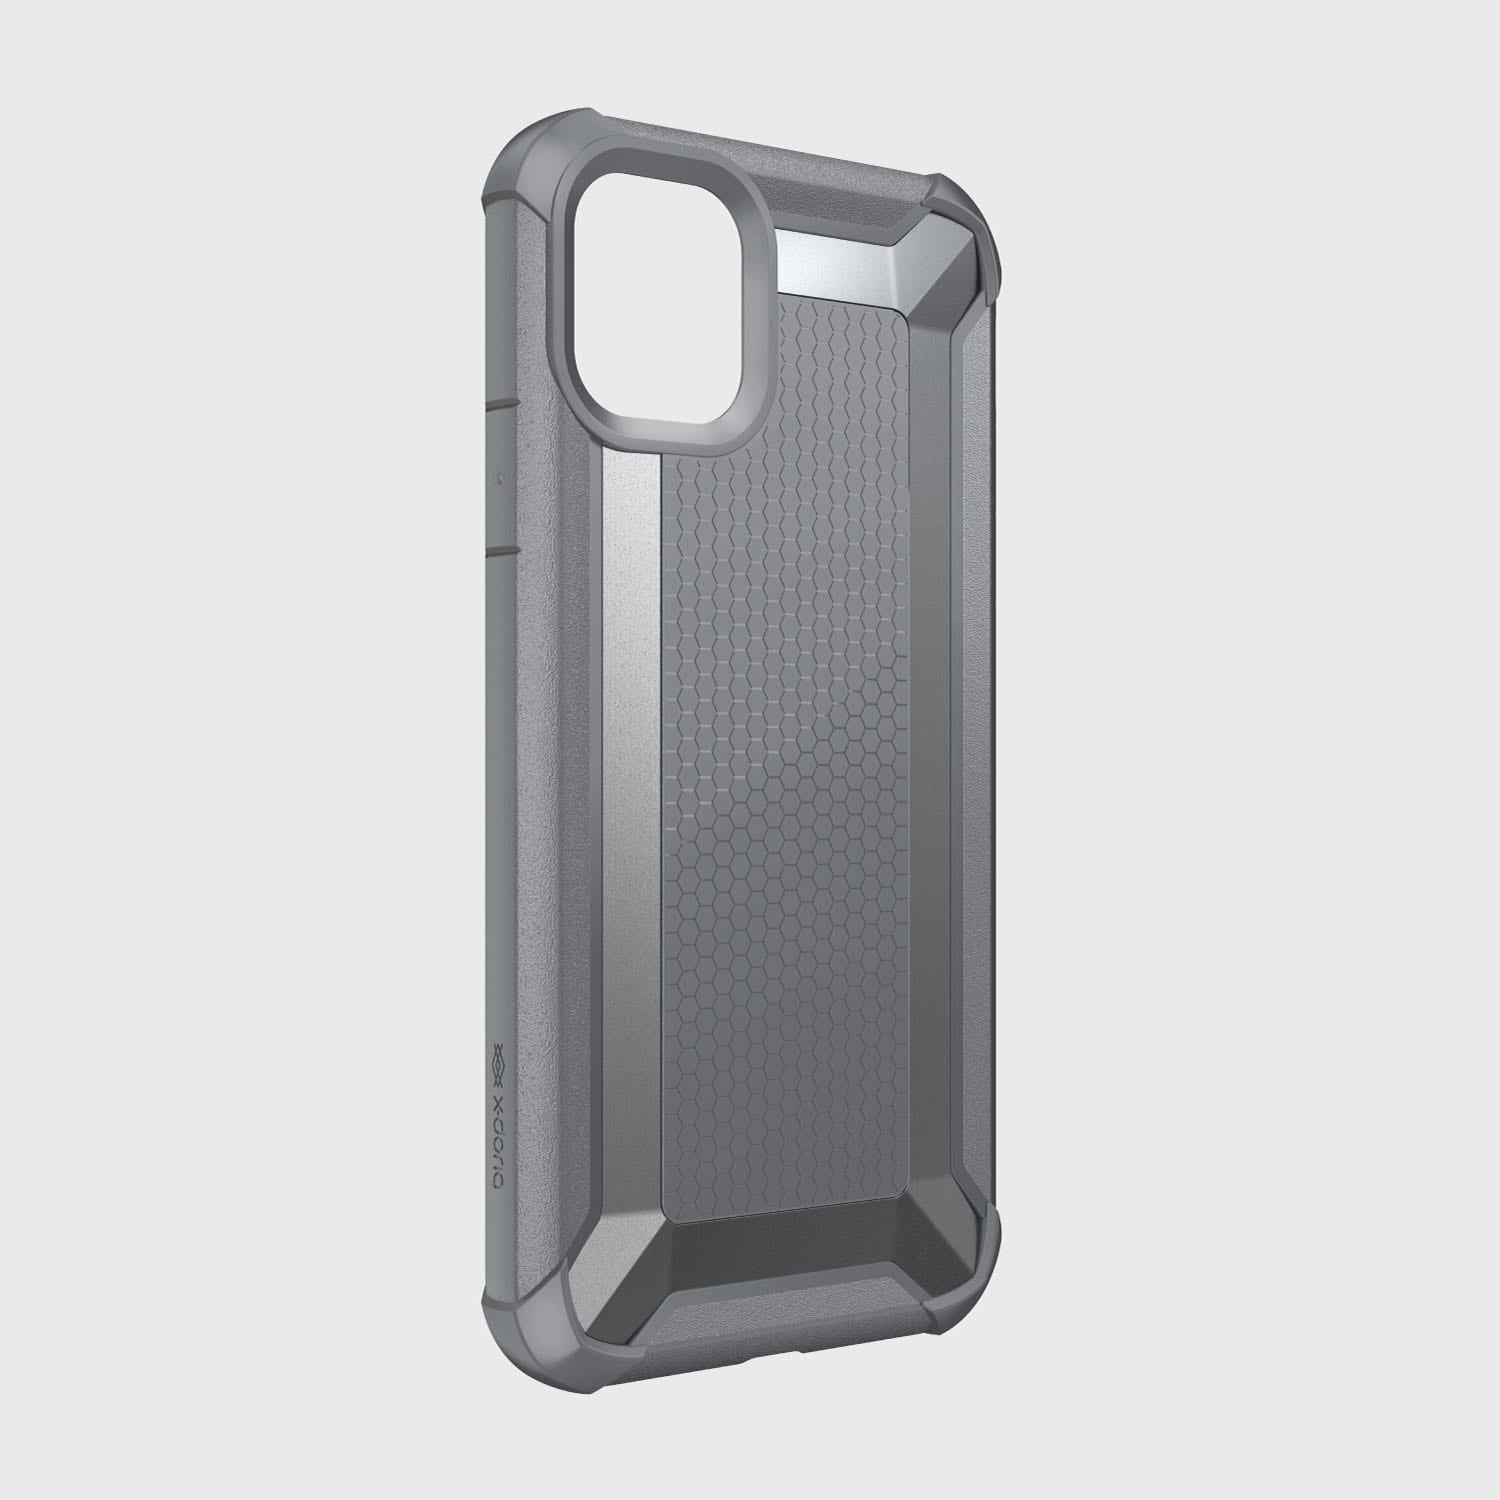 The back view of the Raptic Tactical protective iPhone 11 Pro Max case, featuring its shock-absorbing rubber exterior and complying with Military Standard MIL-STD-810G.